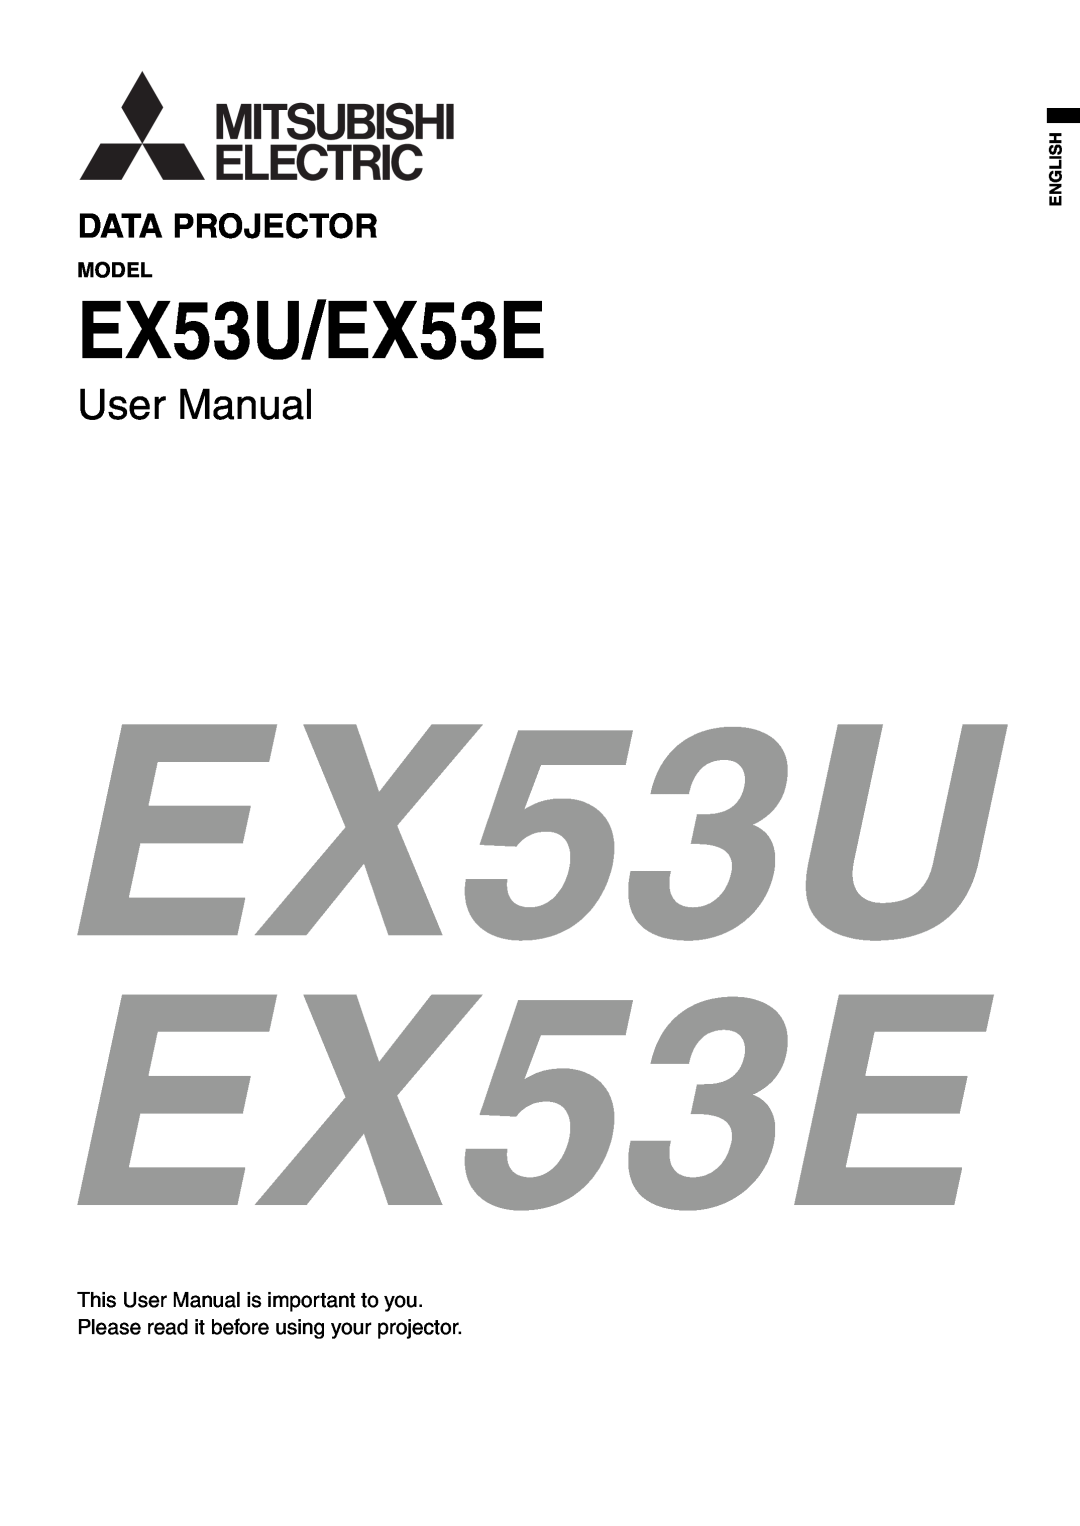 Mitsubishi Electronics user manual Model, This User Manual is important to you, English, EX53U/EX53E, Data Projector 